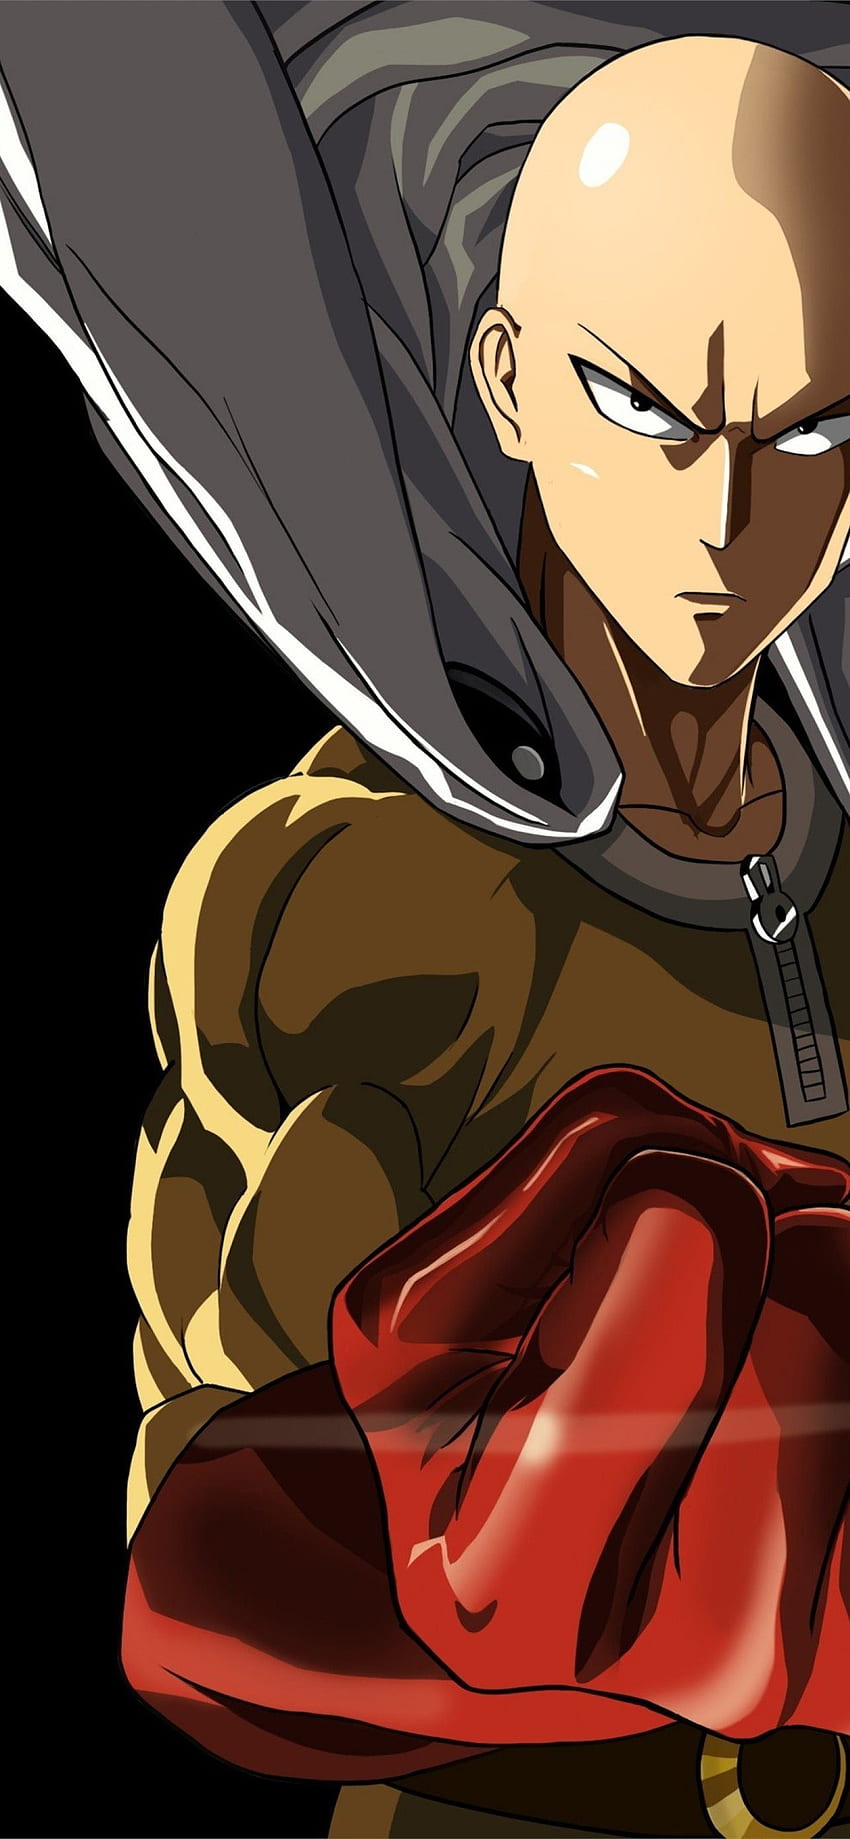 Saitama One Punch Man Cape Fist for Samsung Galaxy. iPhone, One Punch Man Android HD phone wallpaper